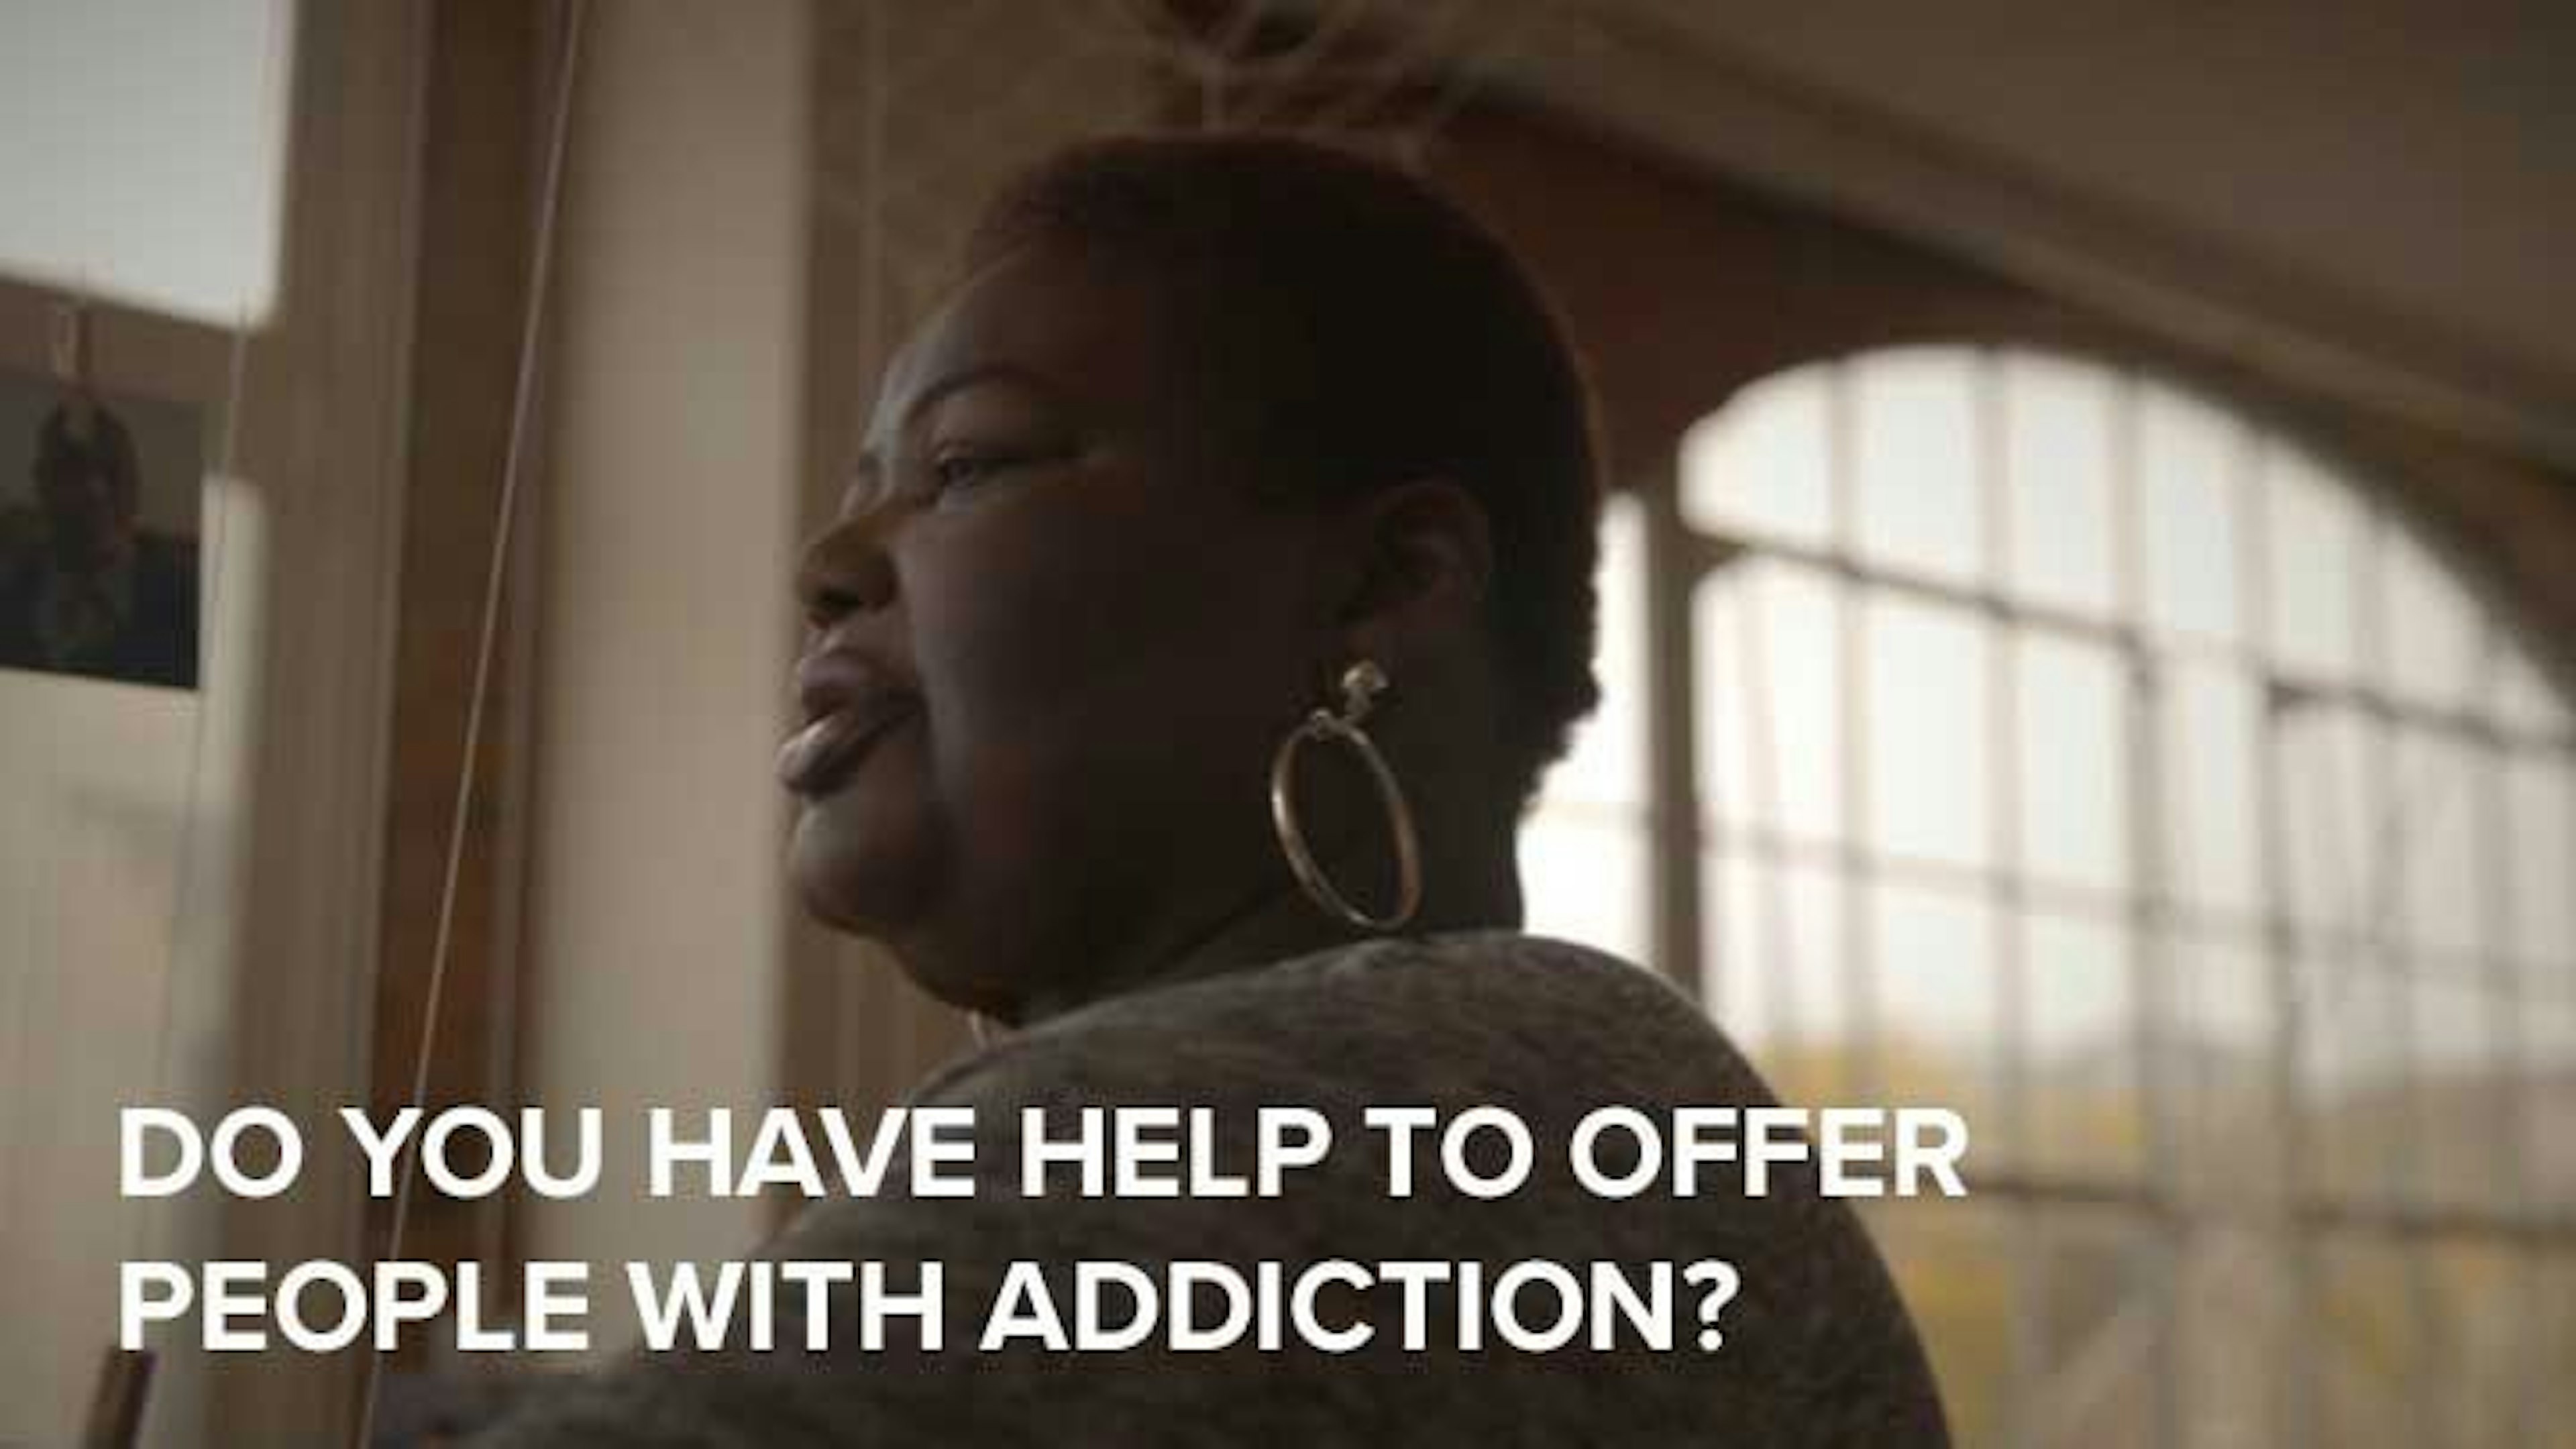 Do you have help to offer people with addiction?